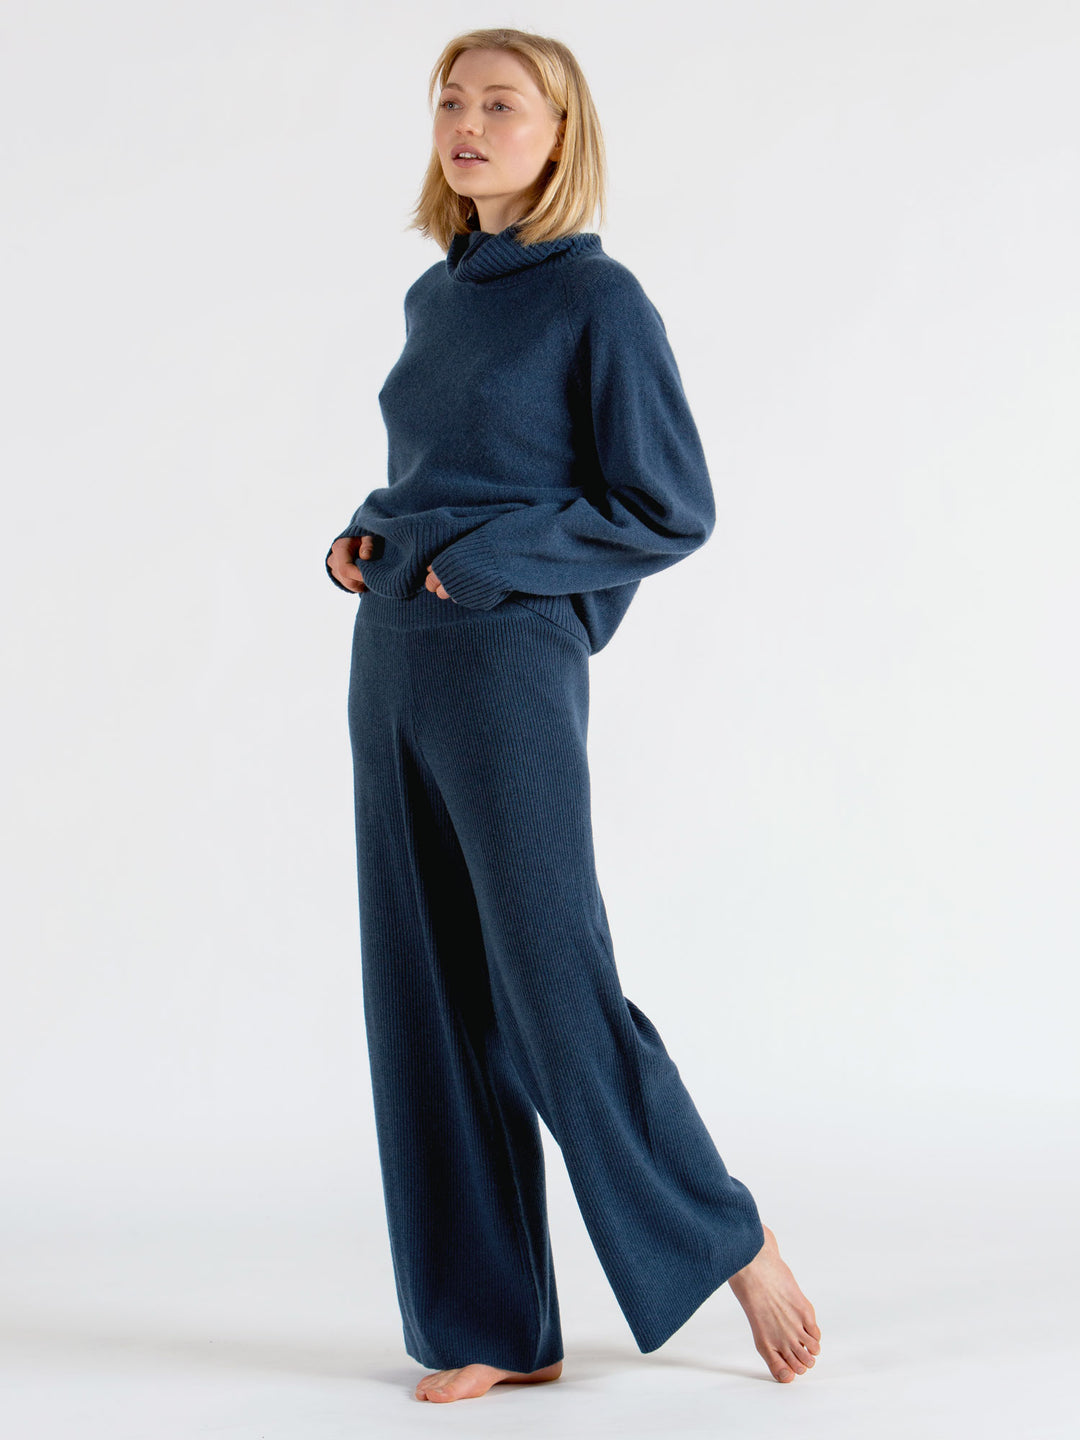 cashmere pants North, mountain blue, 100% cashmere from kashmina, norwegian design